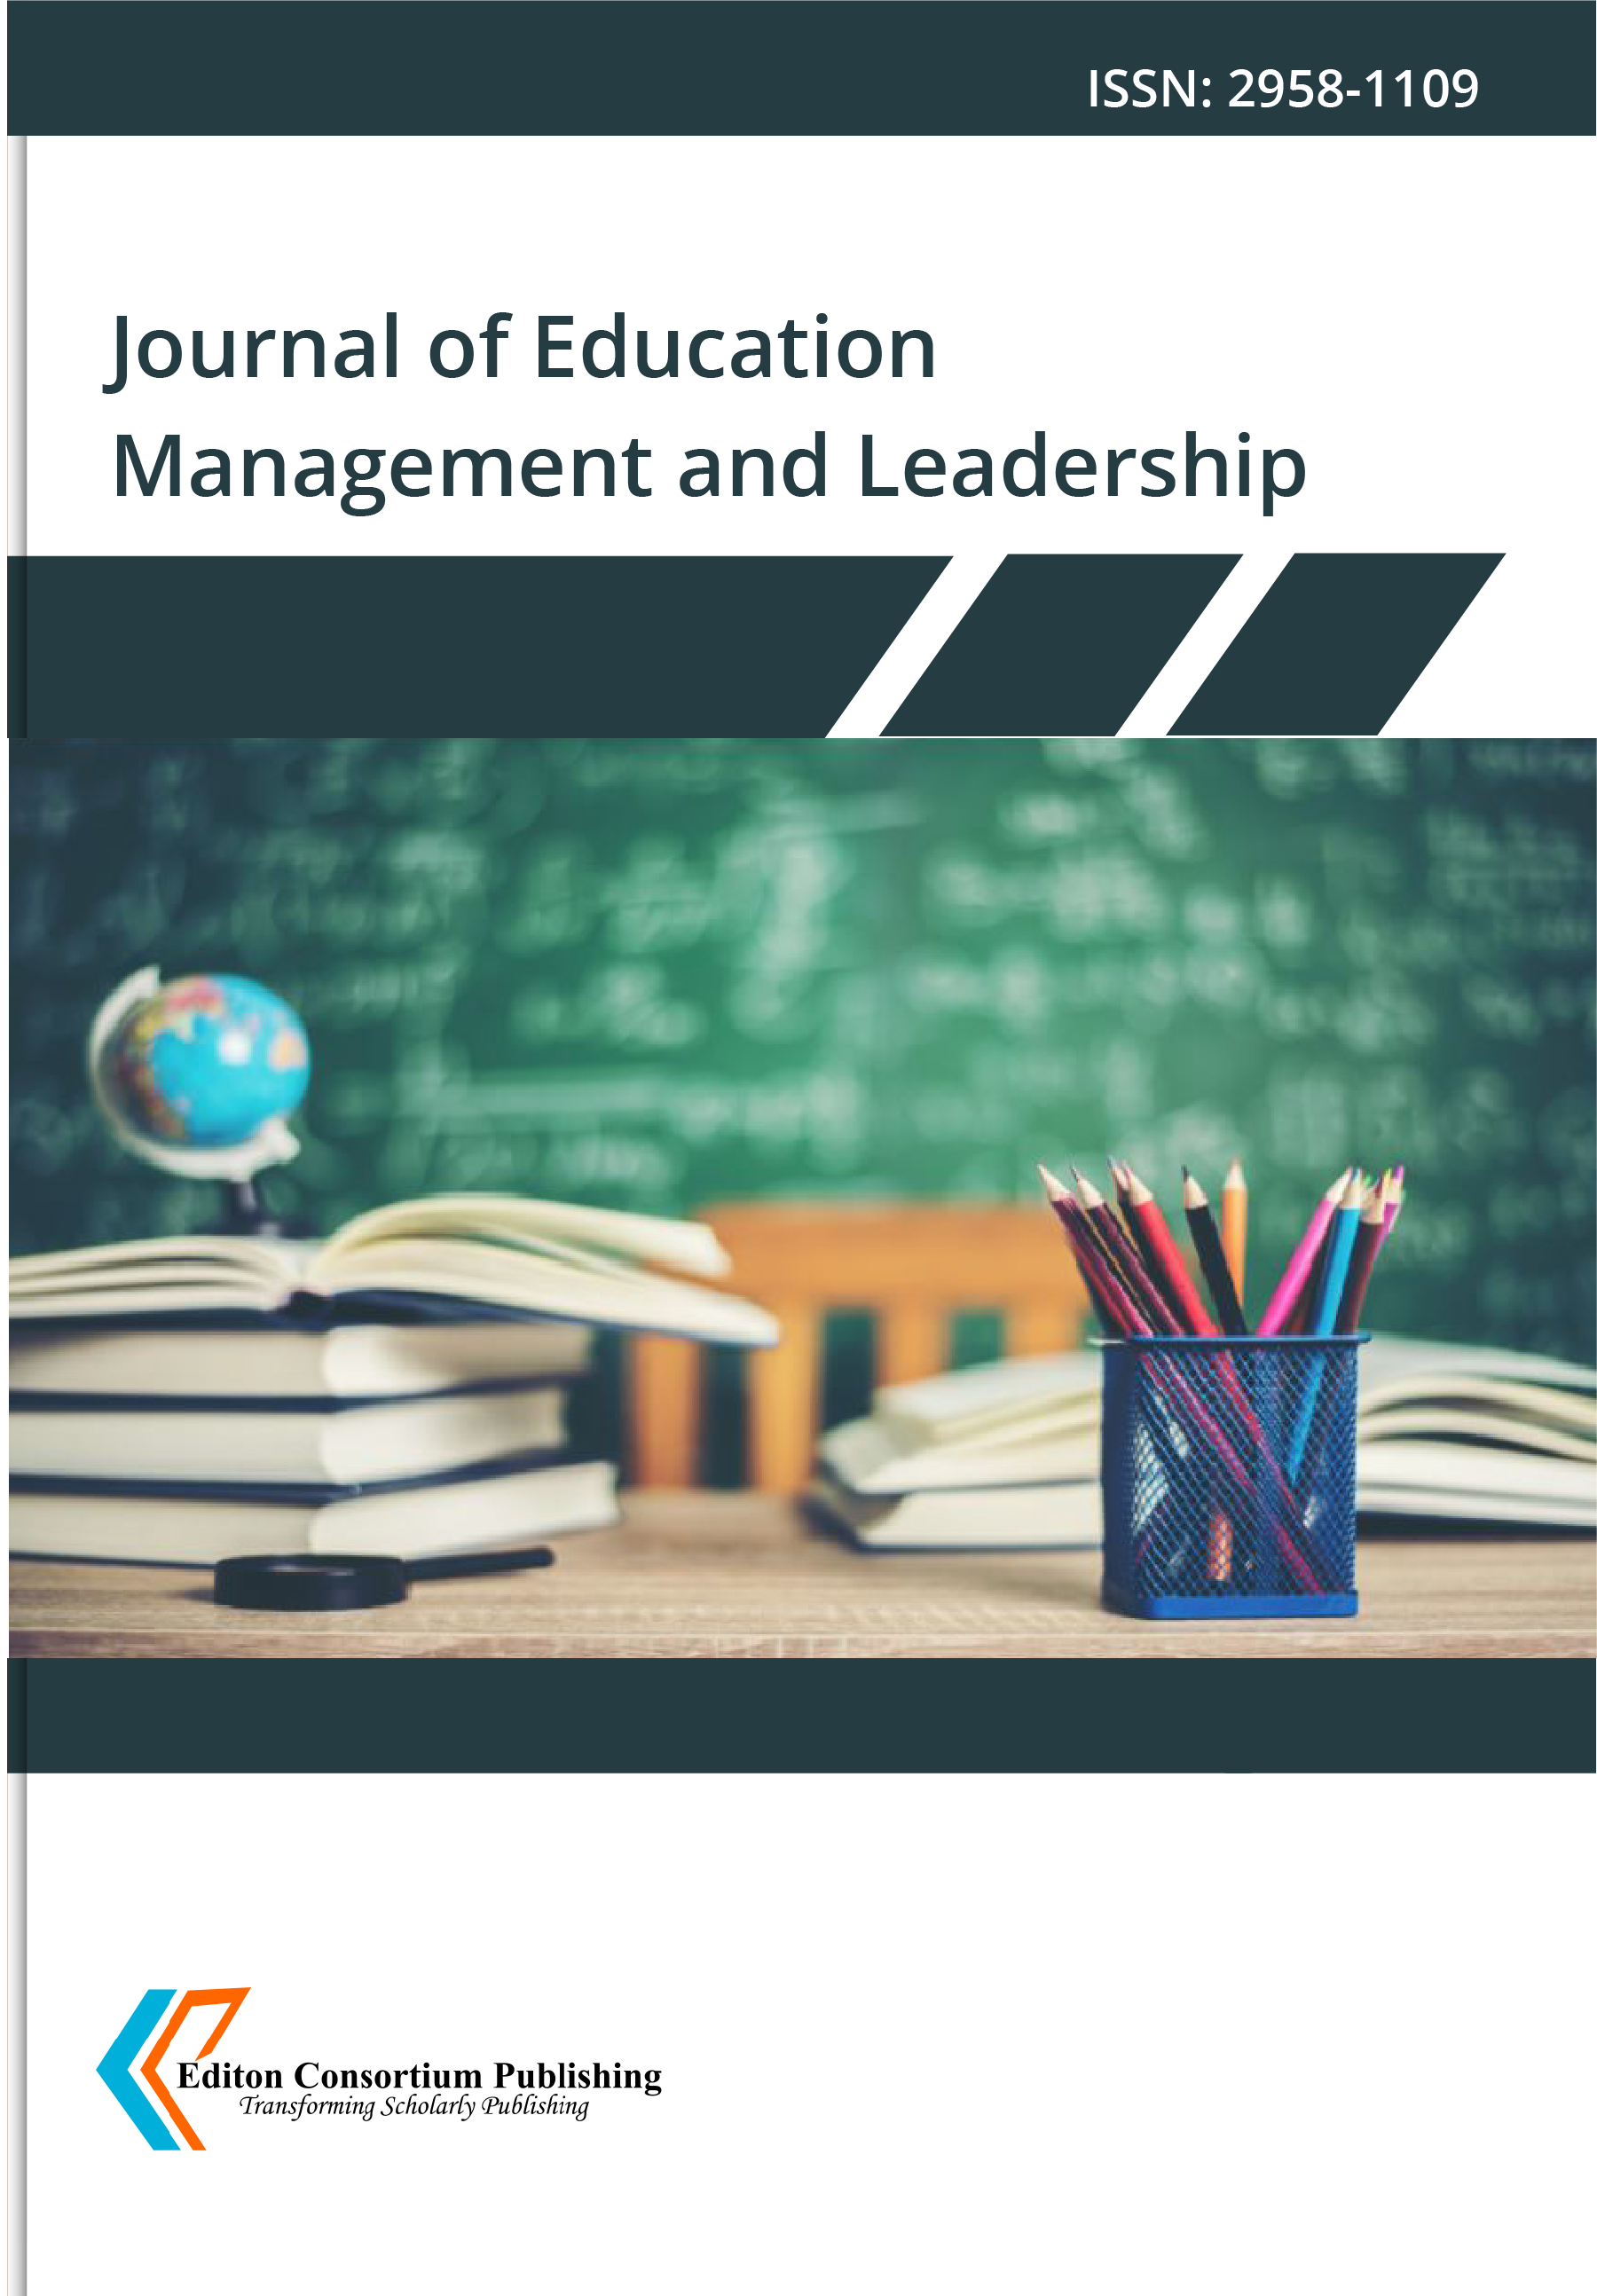  Journal of Education Management and Leadership